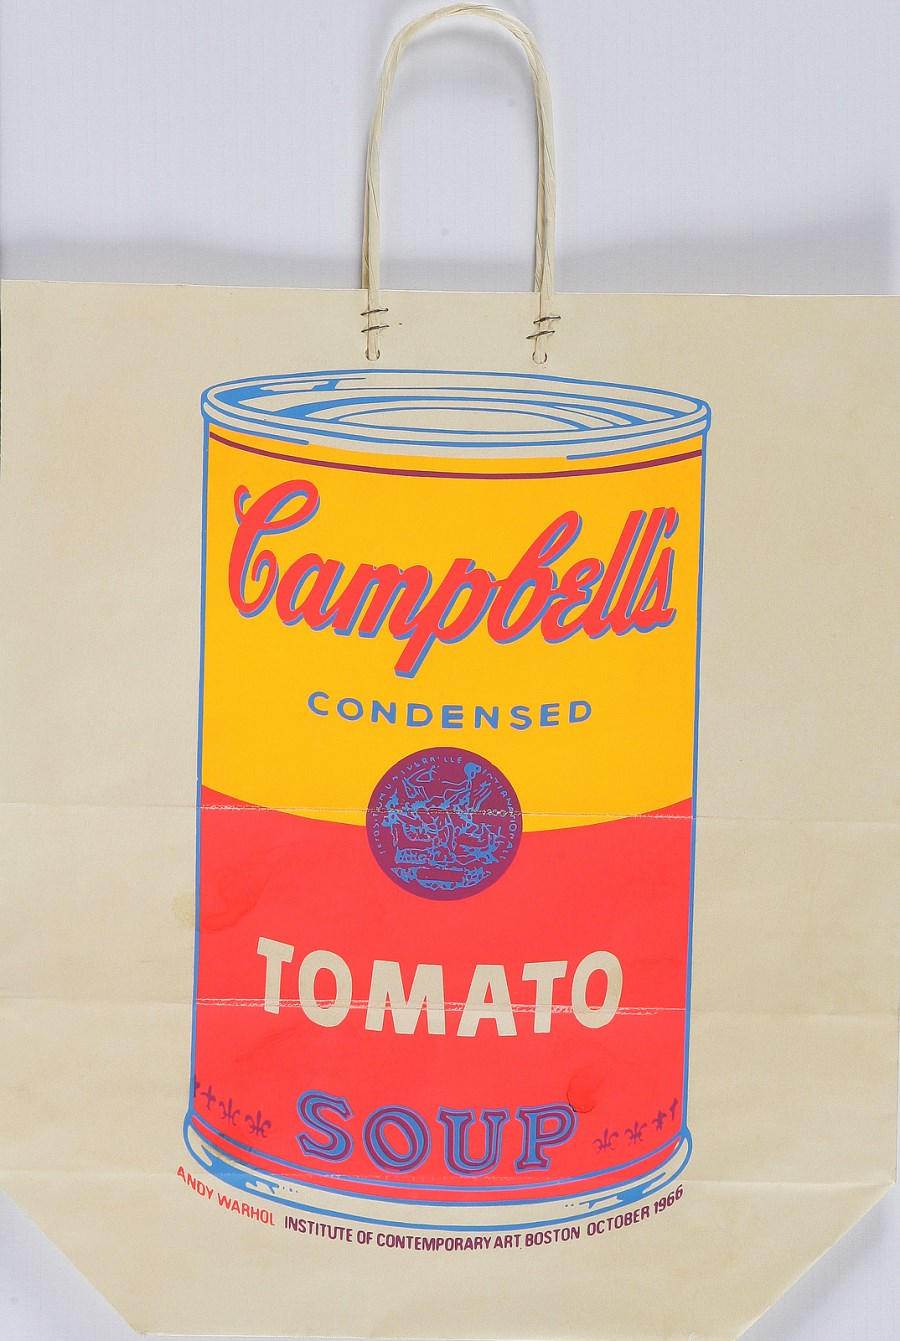 Campbell's soup shopping bag. (Andy Warhol)